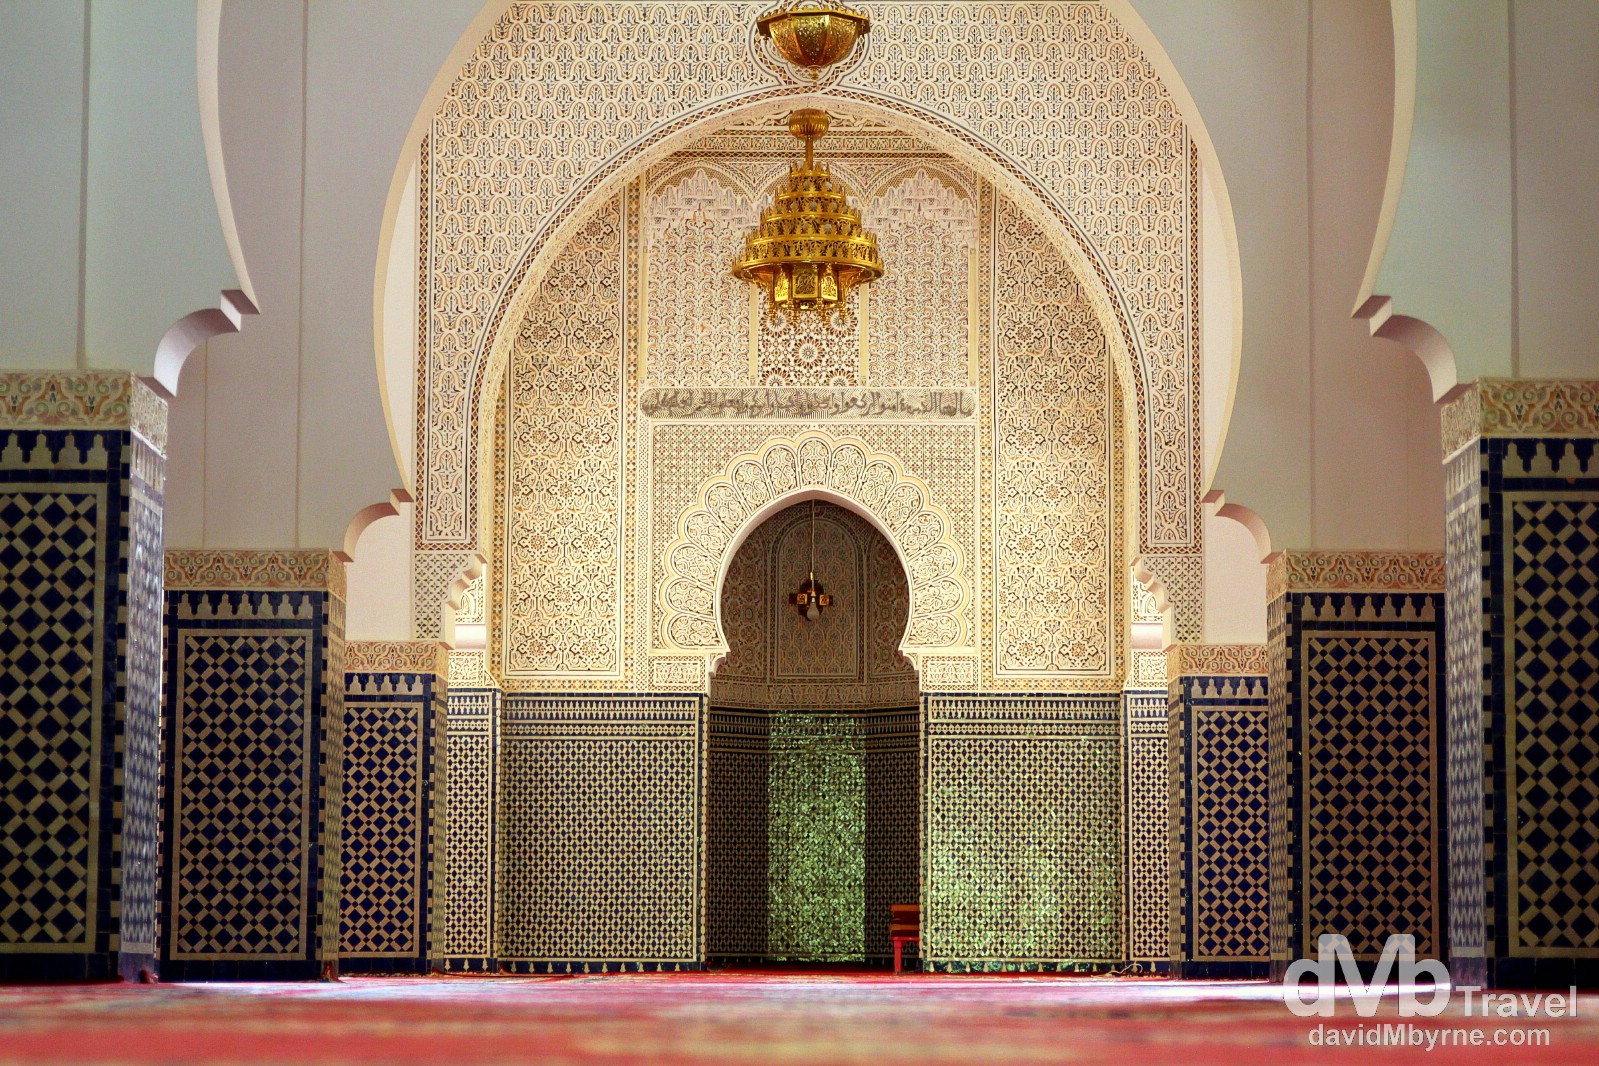 The interior of the Zaouai of Moulay Ali Shereef, the founder of the Moroccan Alaouite dynasty, outside the village of Rissani, Morocco. May 22nd, 2014.